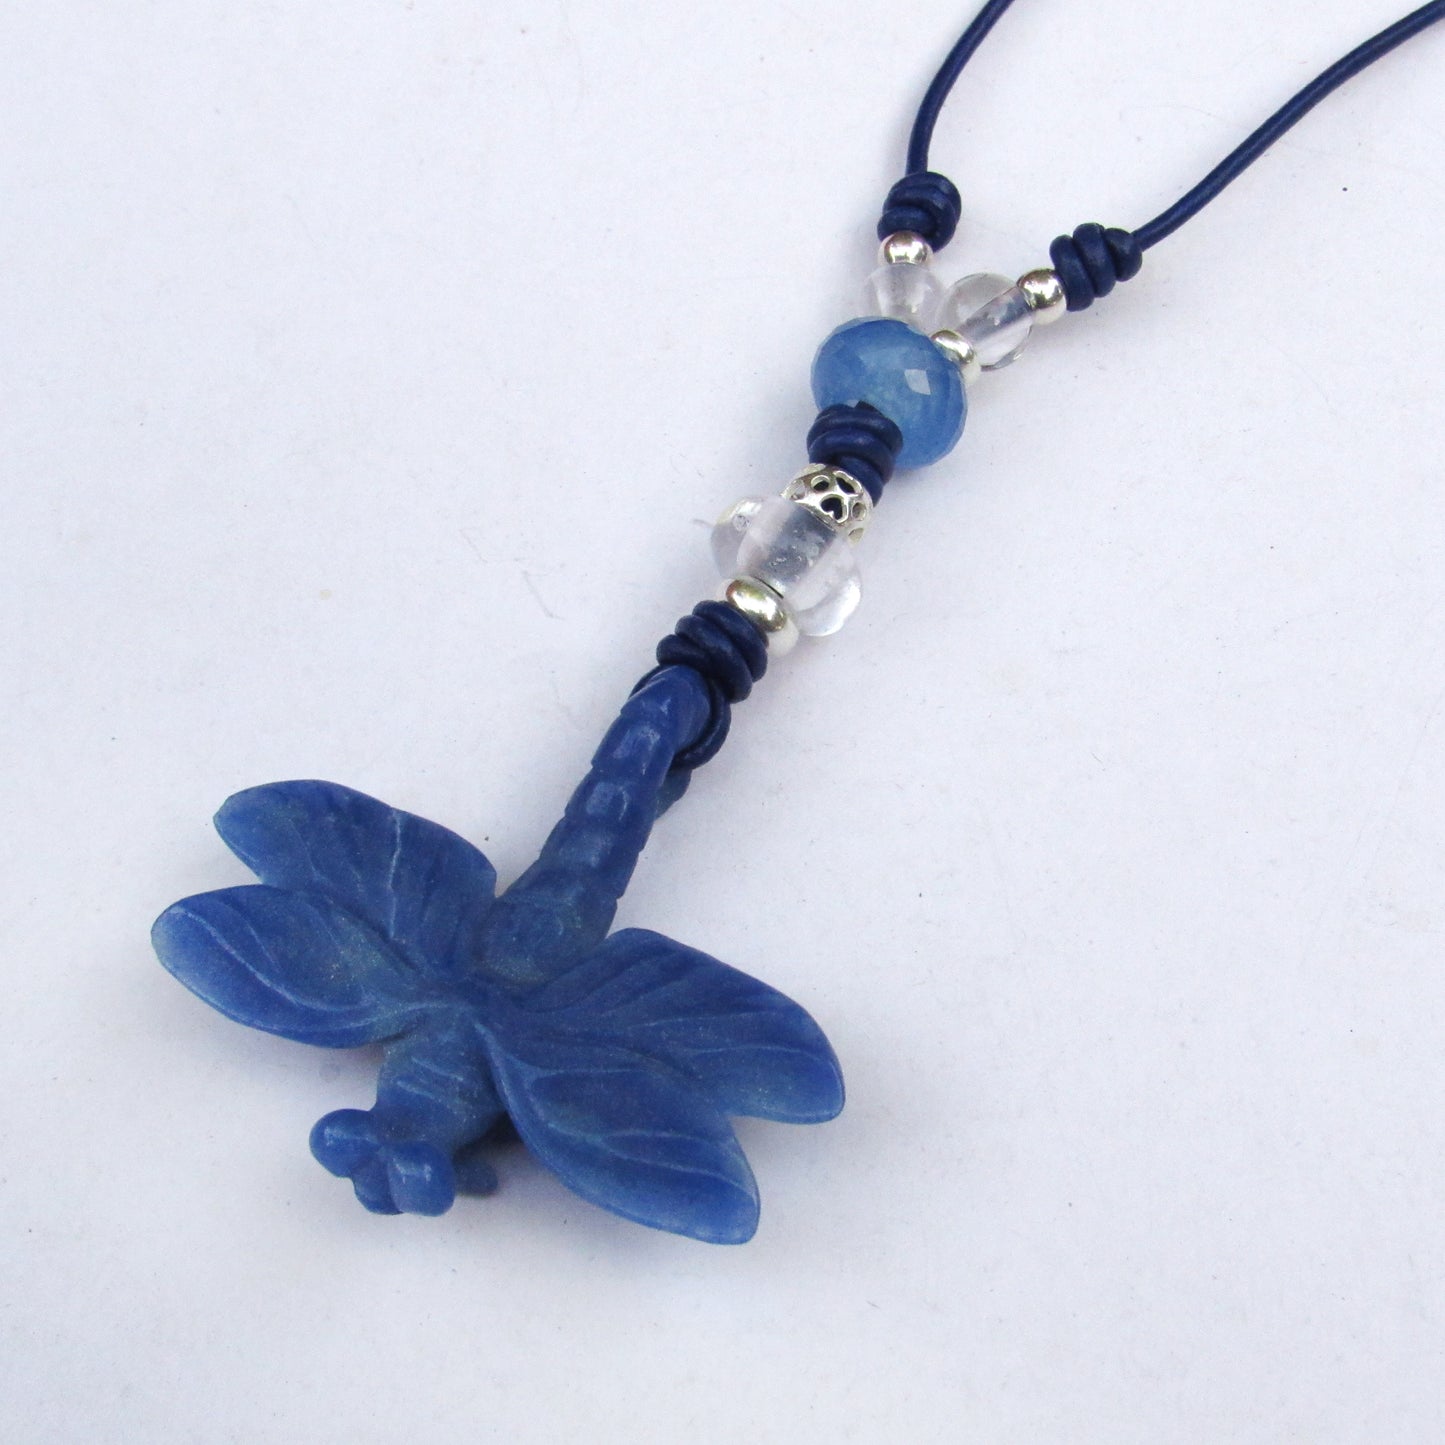 Blue Aventurine gemstone Dragon Fly with Clear Quartz and Sterling Silver